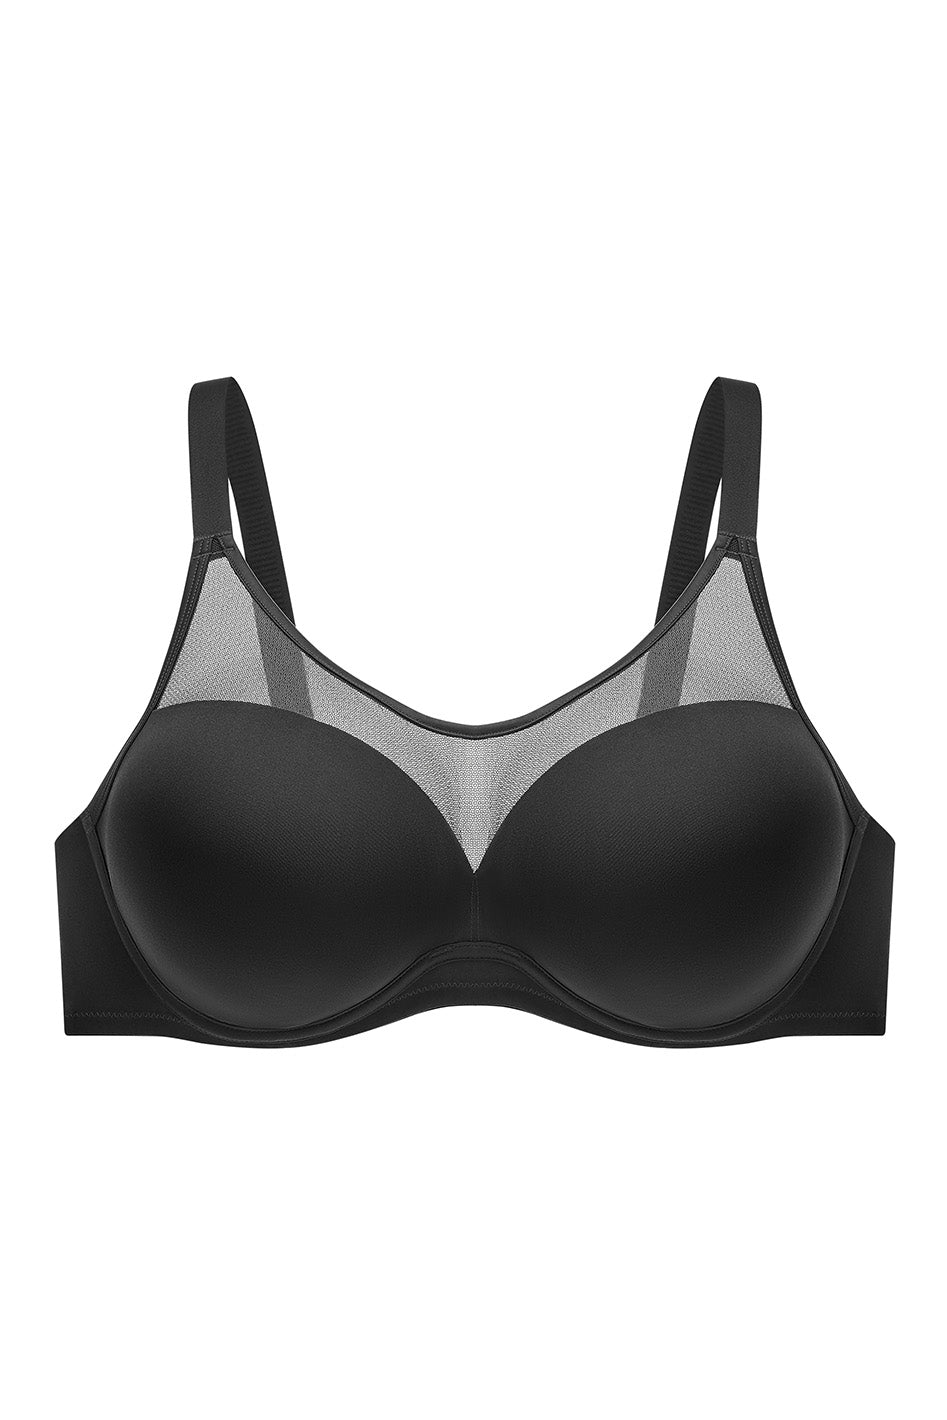 BARELY BREEZIES Seamless Full Coverage Teardrop Underwire Bra A211857 – ASA  College: Florida